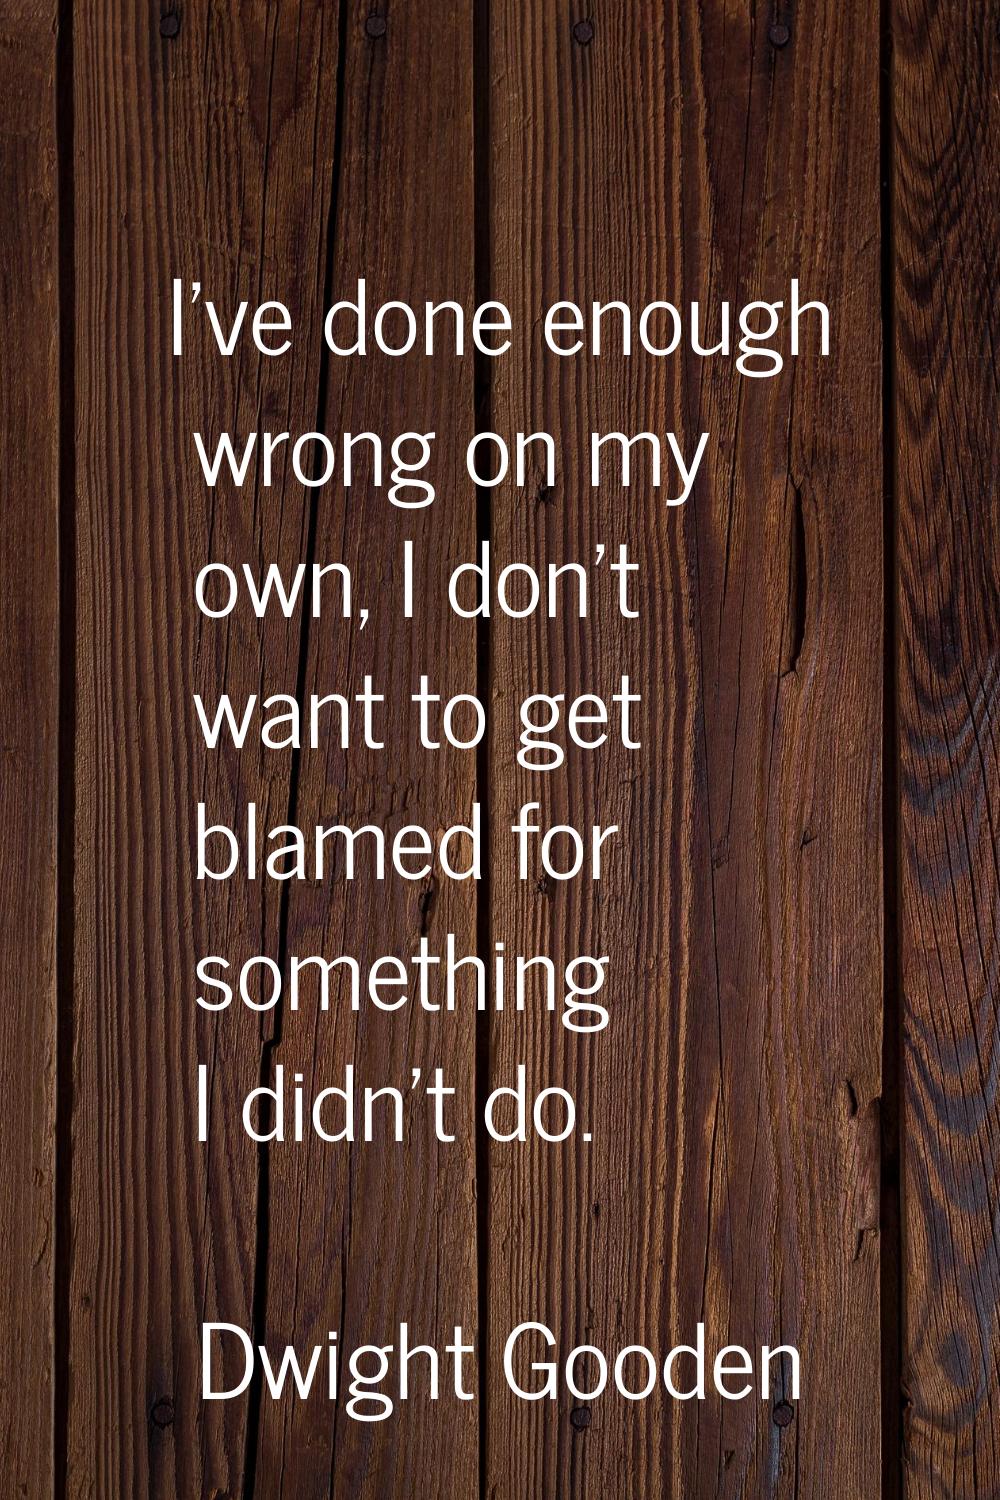 I've done enough wrong on my own, I don't want to get blamed for something I didn't do.